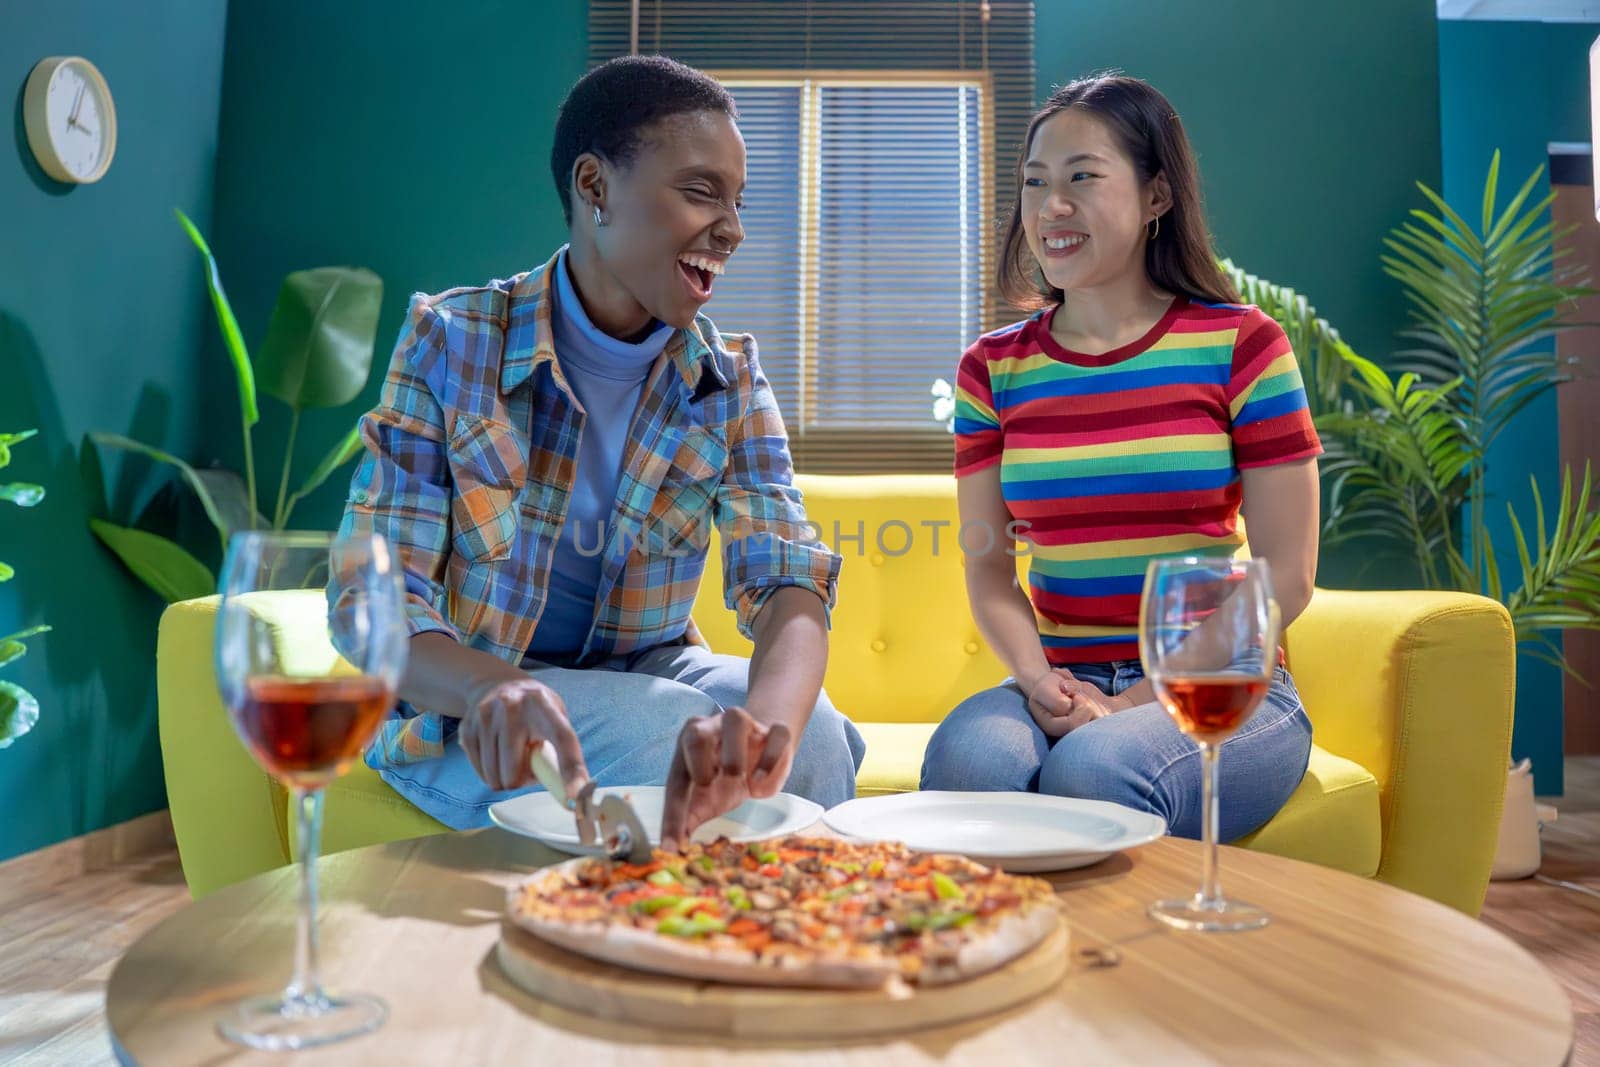 Two female friends celebrating with pizza and wine having fun together at home. High quality photo